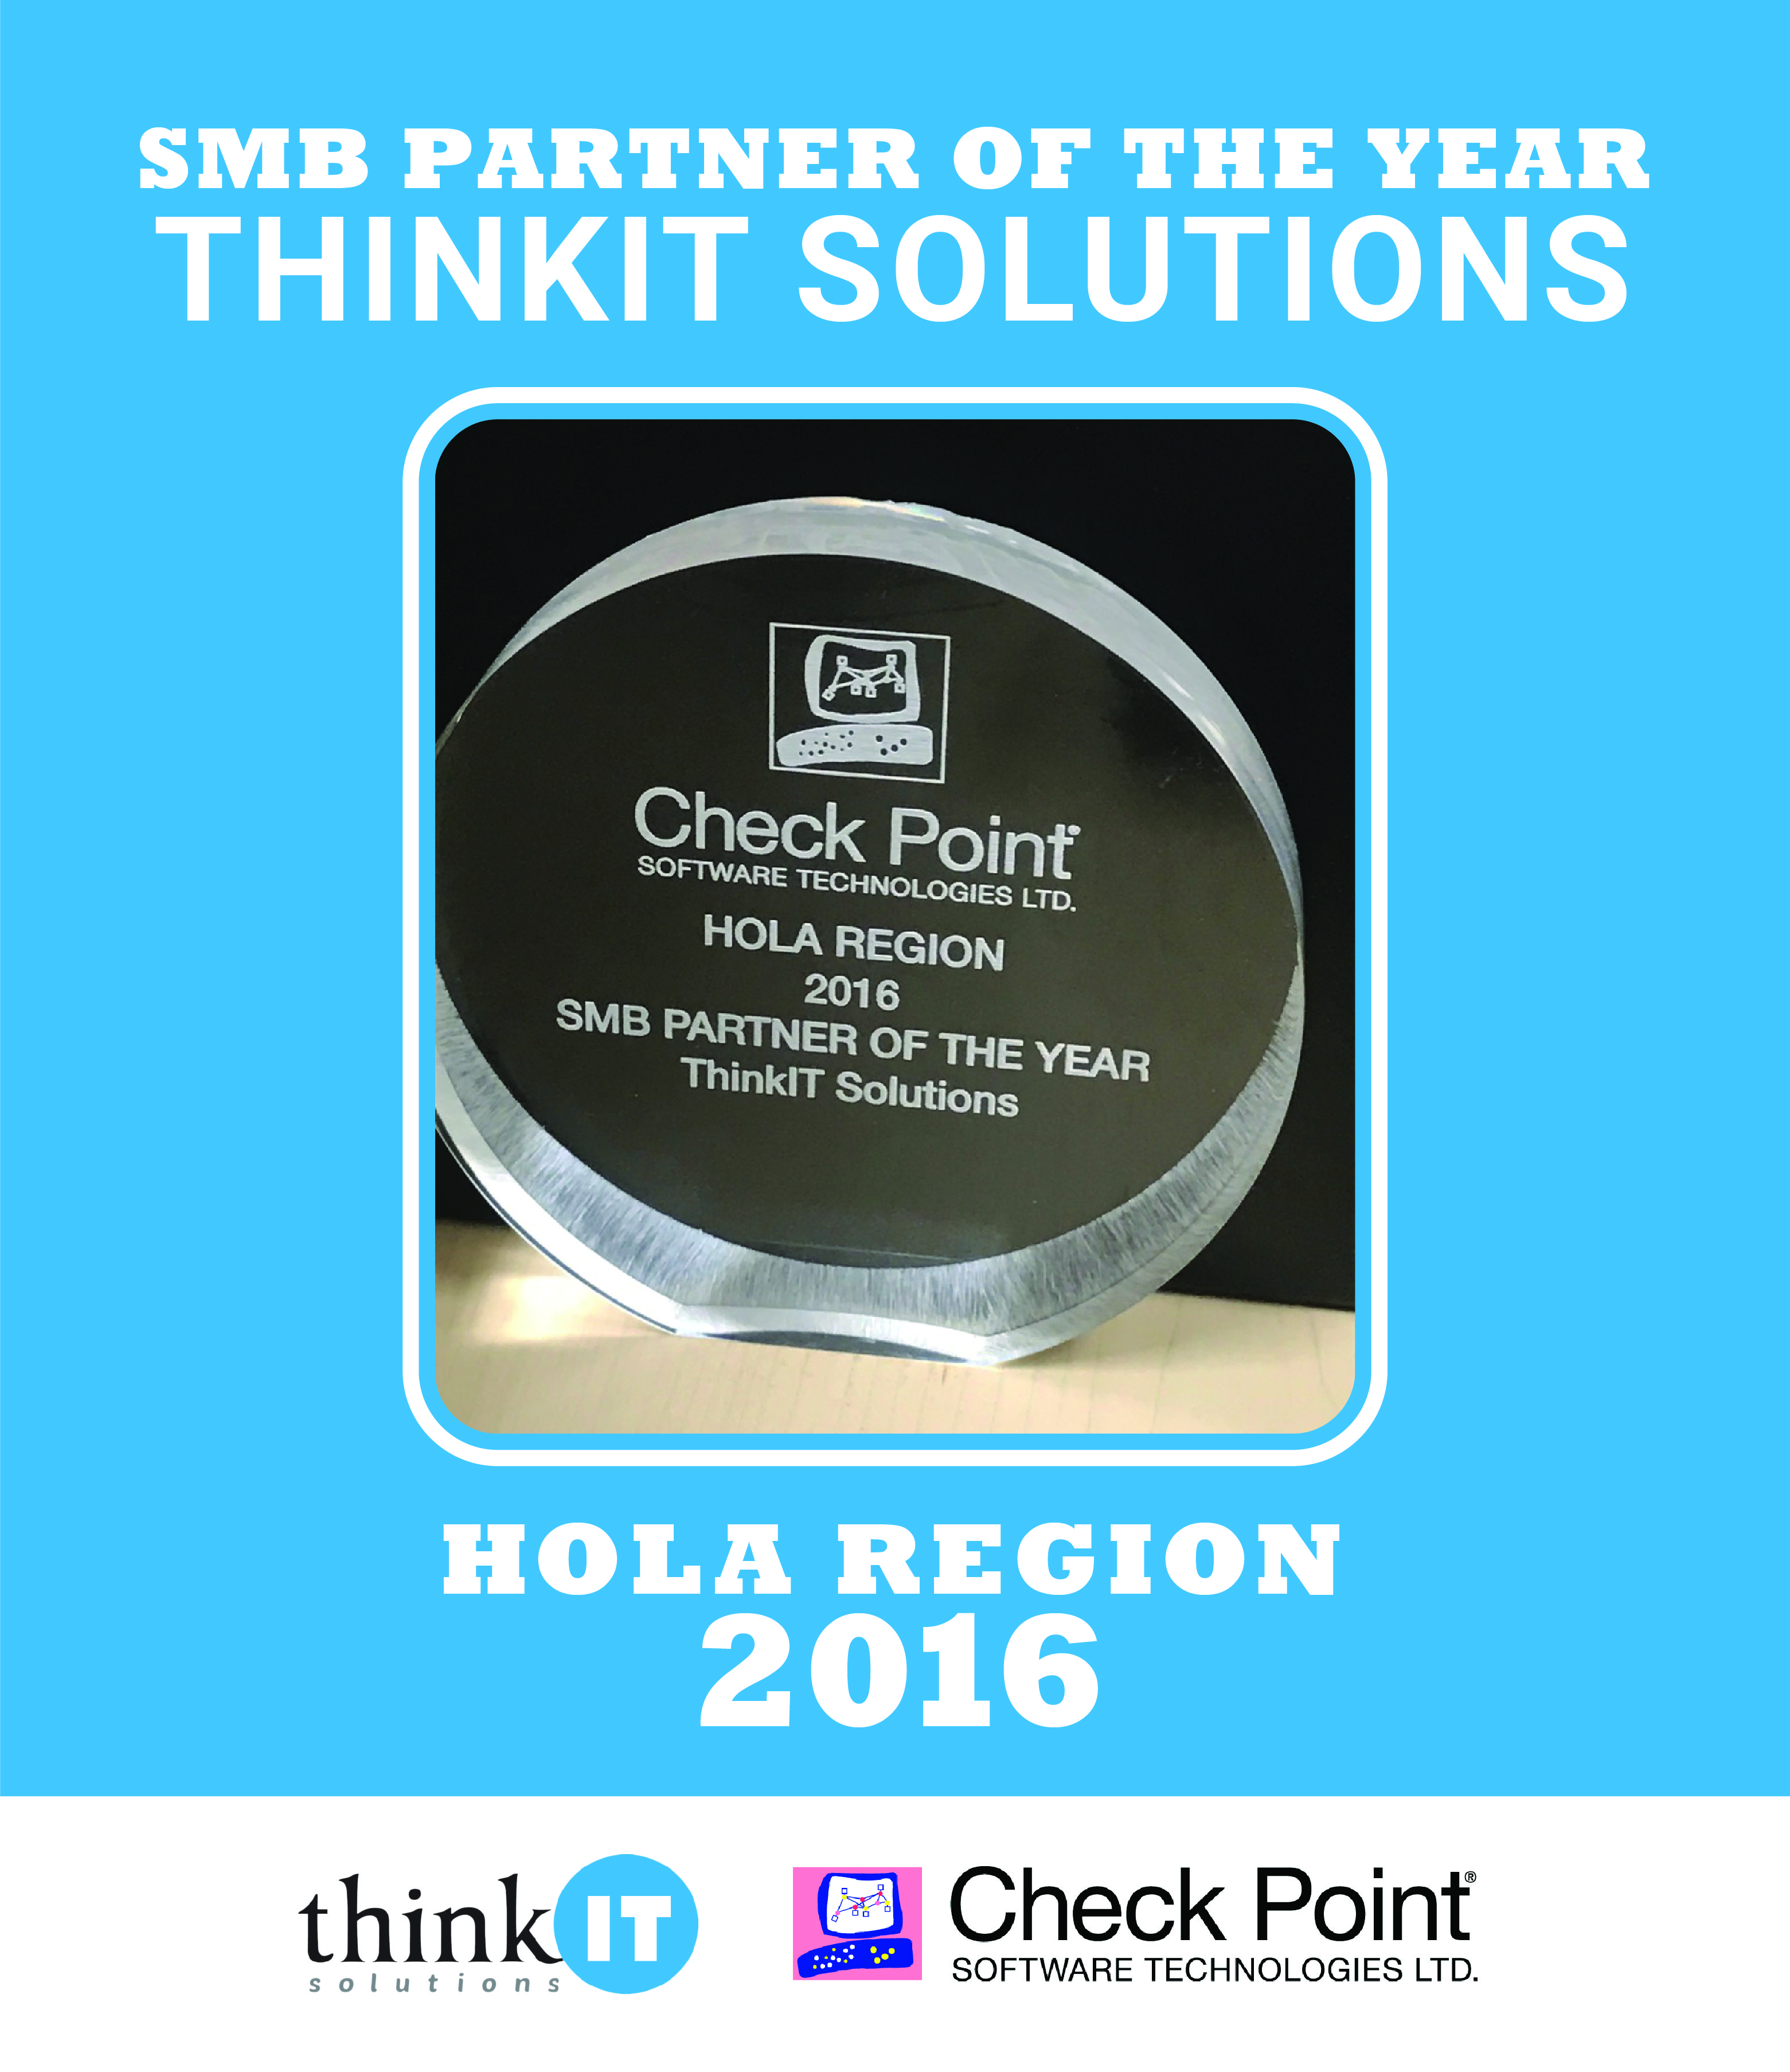 thinkIT Solutions Selected as Checkpoint’s 2016 Small and Midsize Business Partner of the Year for the HOLA Region